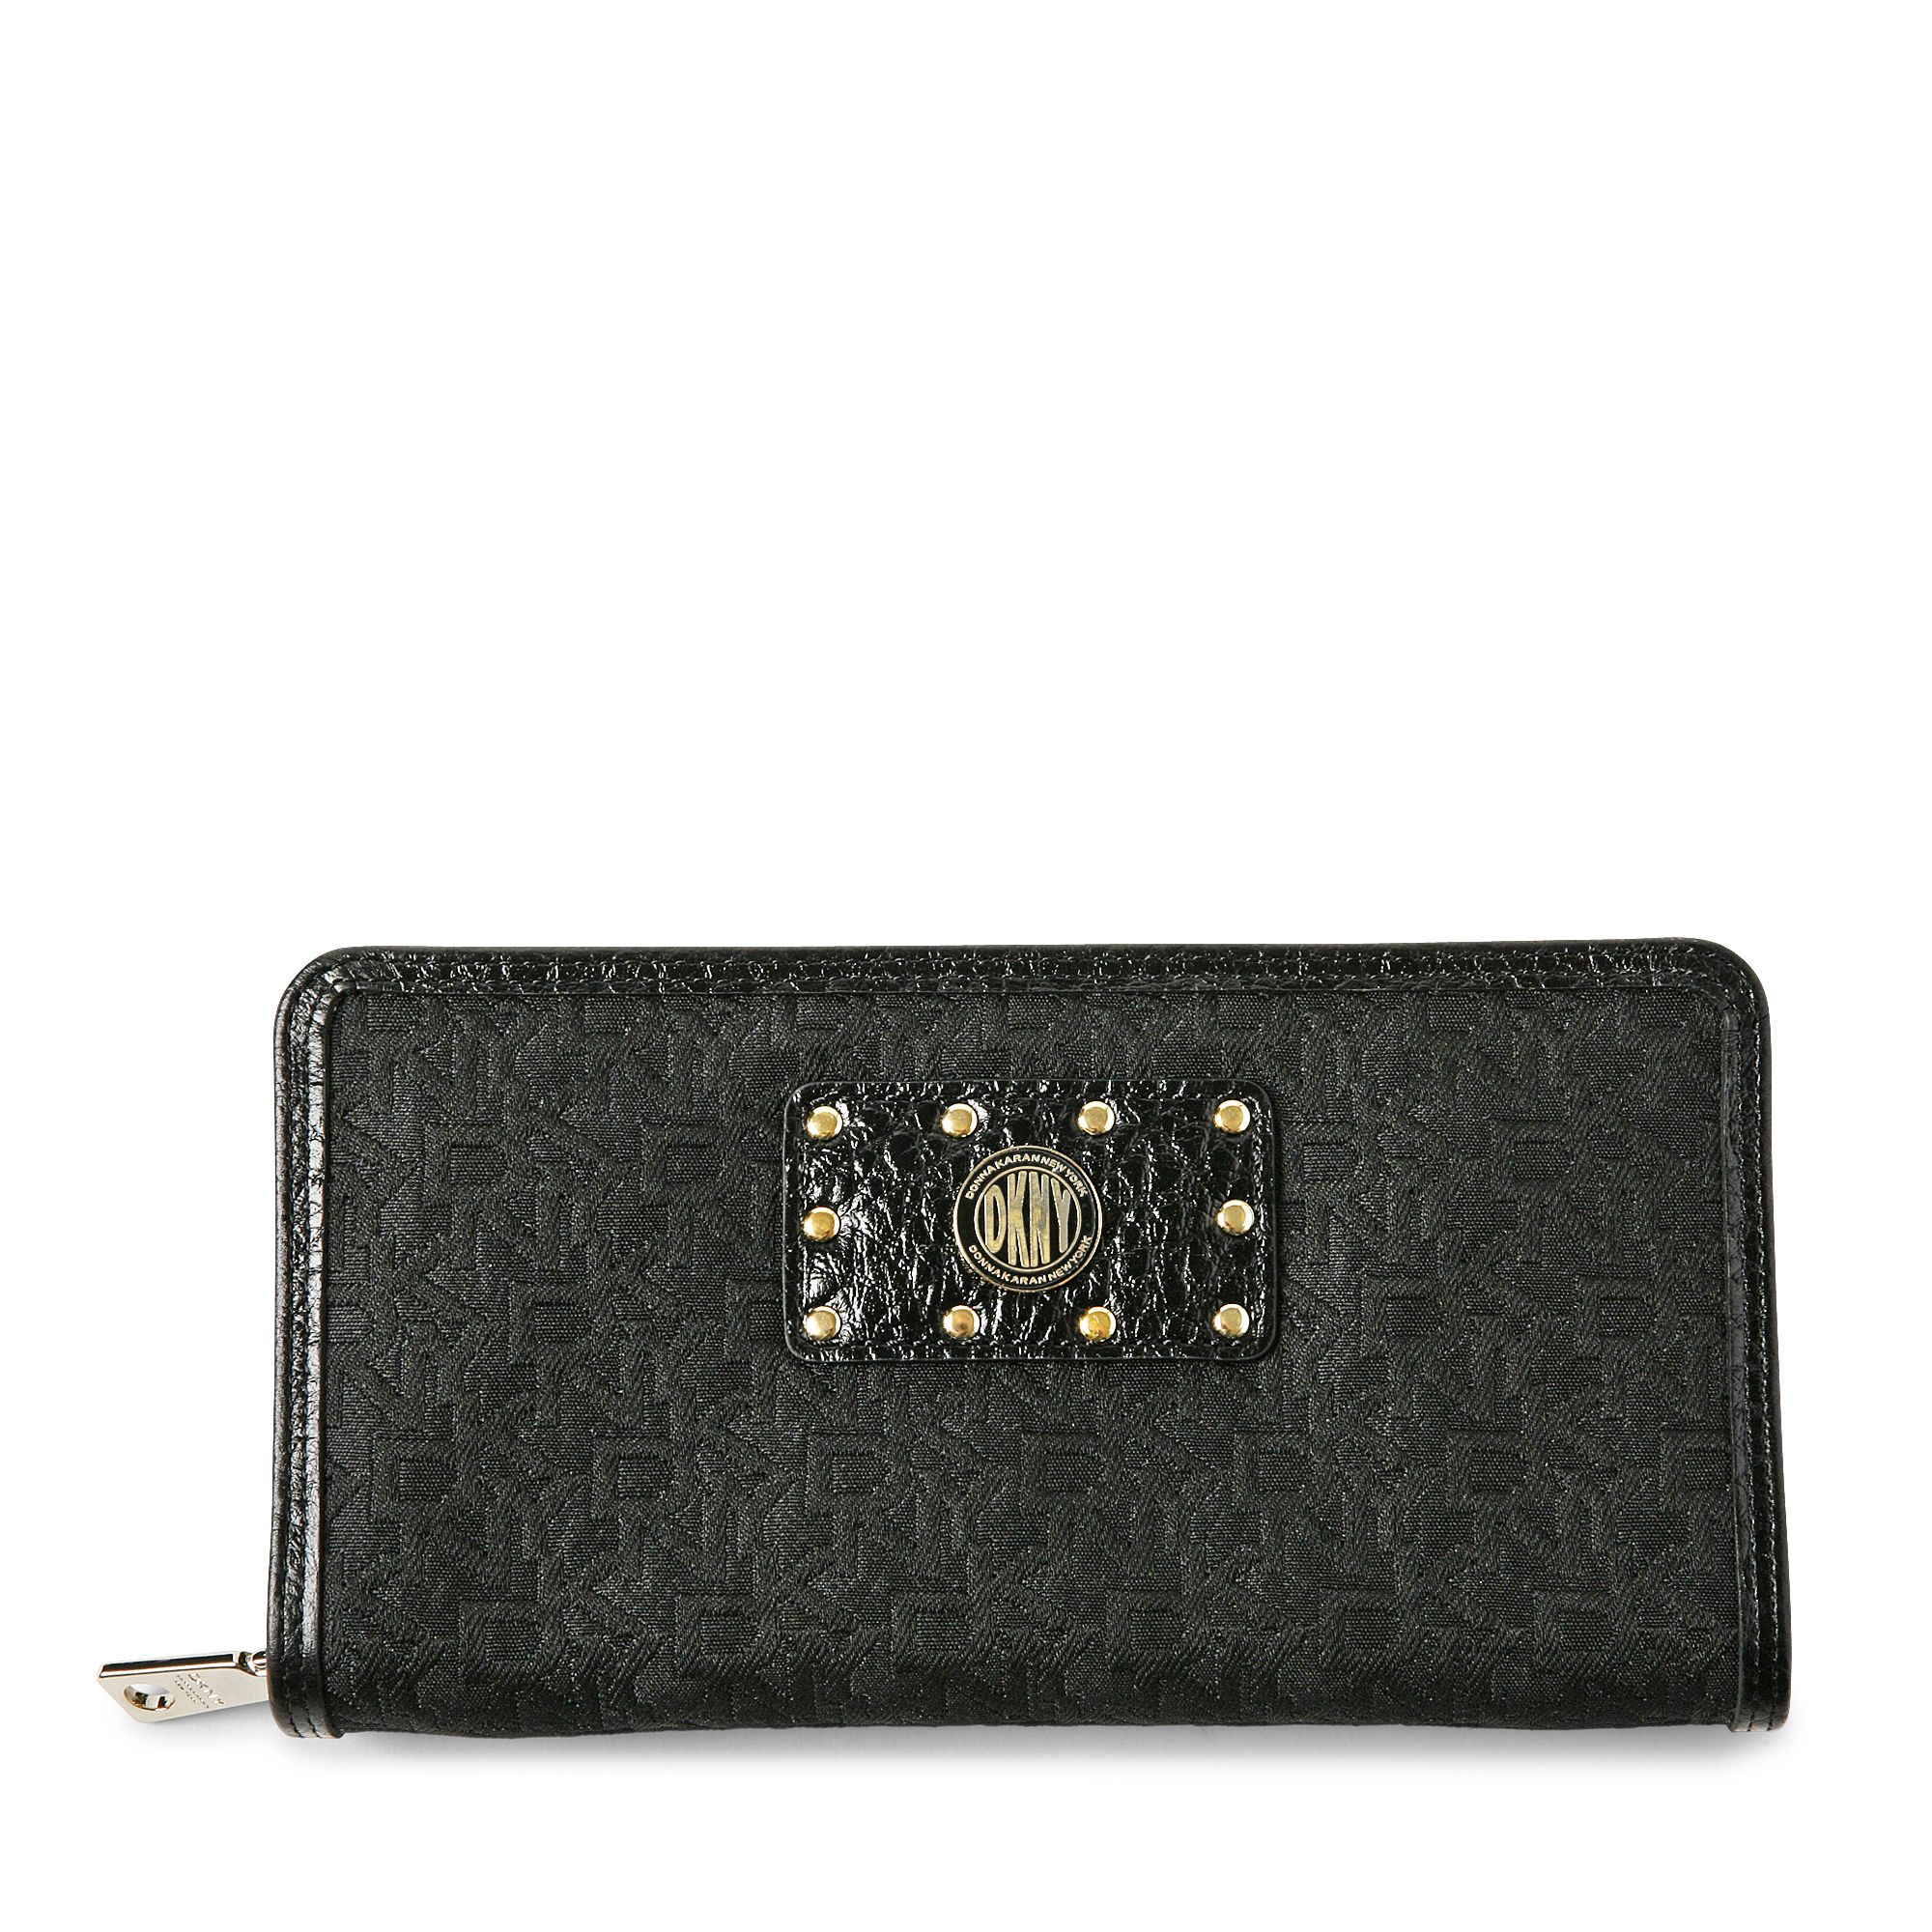 Dkny Town and Country Large Zip Around Wallet in Black | Lyst